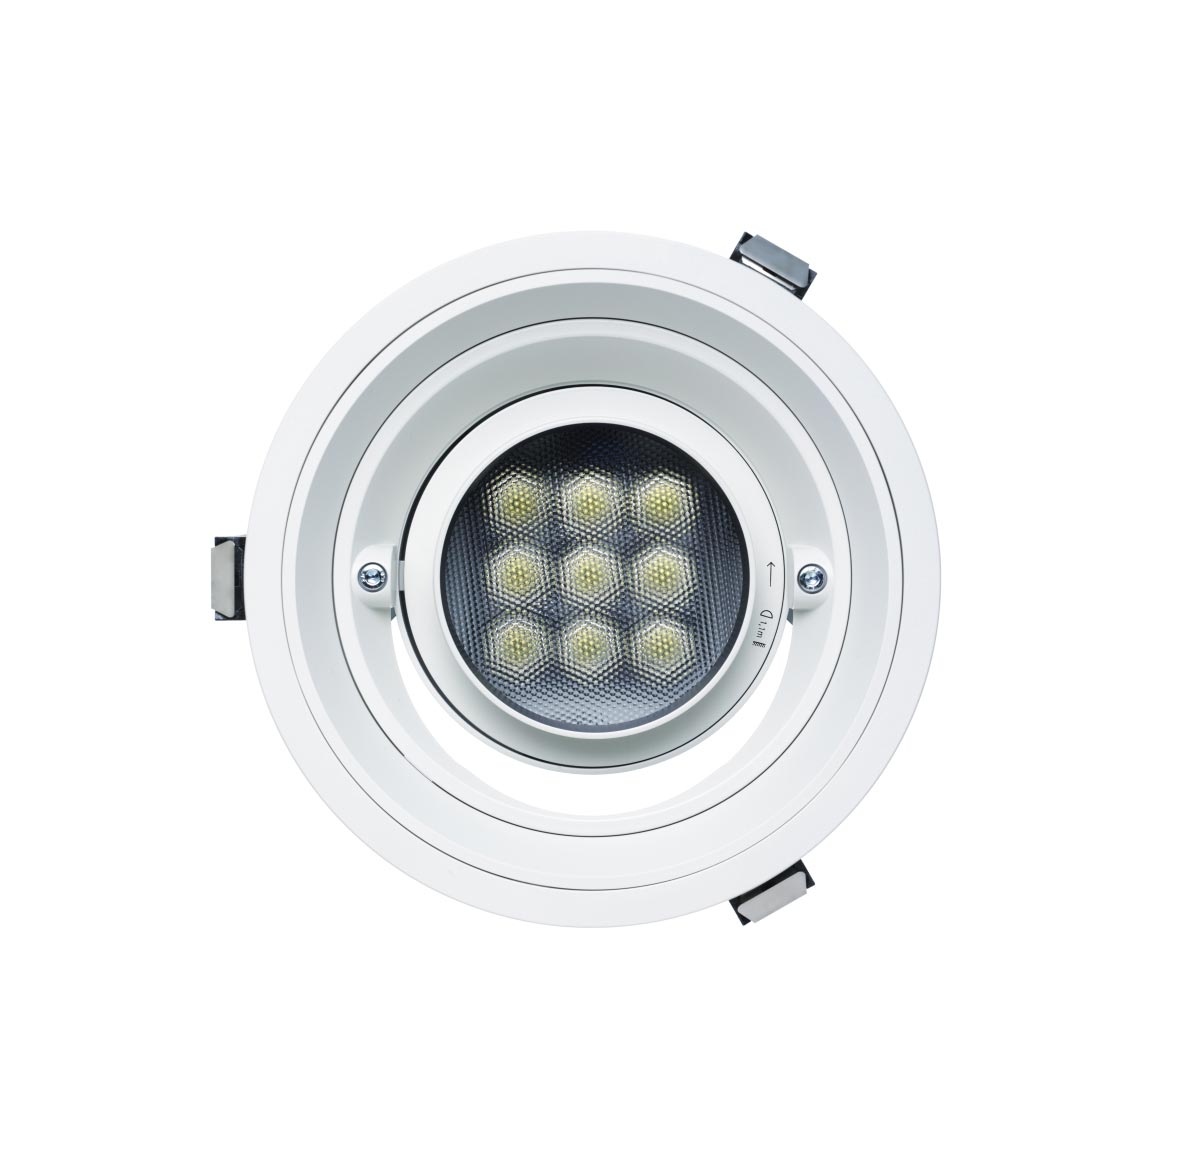 Quintessence Recessed Spotlight With Flush Mounting Tray LED 2W 275lm 4000K Neutral White Dimmable